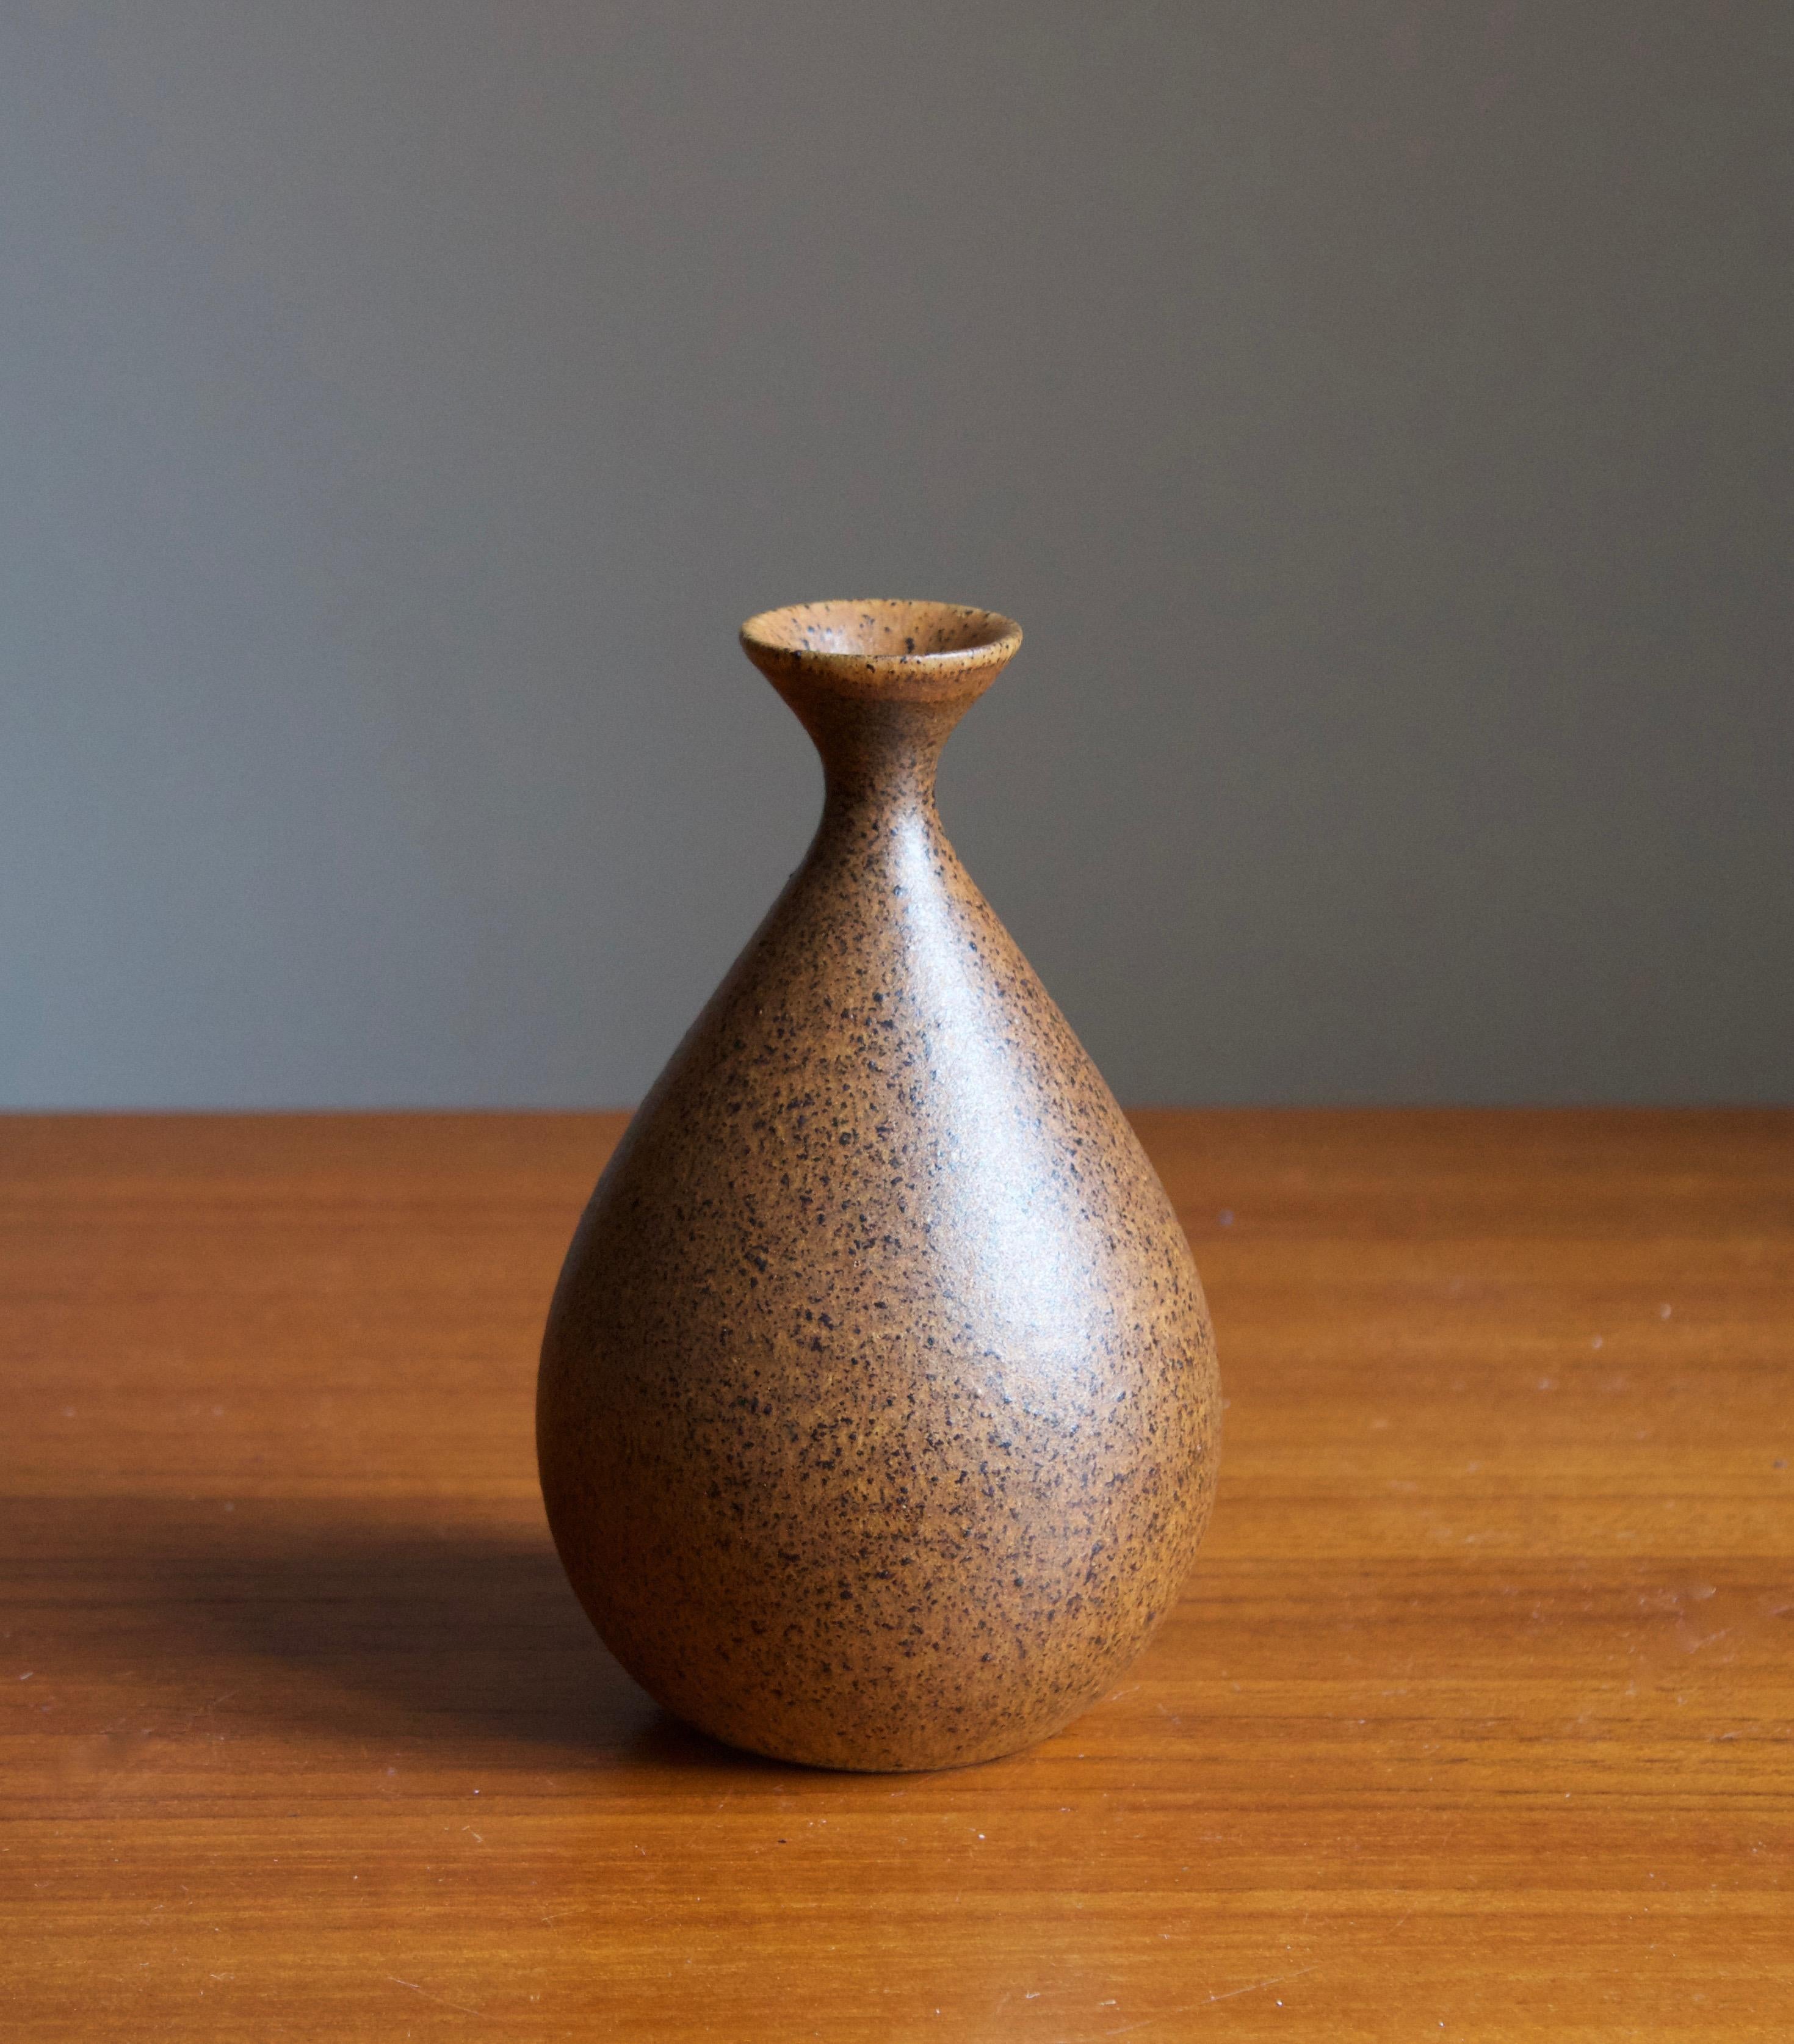 A small handmade stoneware vase, executed by Bruno Karlsson in abstract form and highly artistic brown glaze. In his Studio, called 